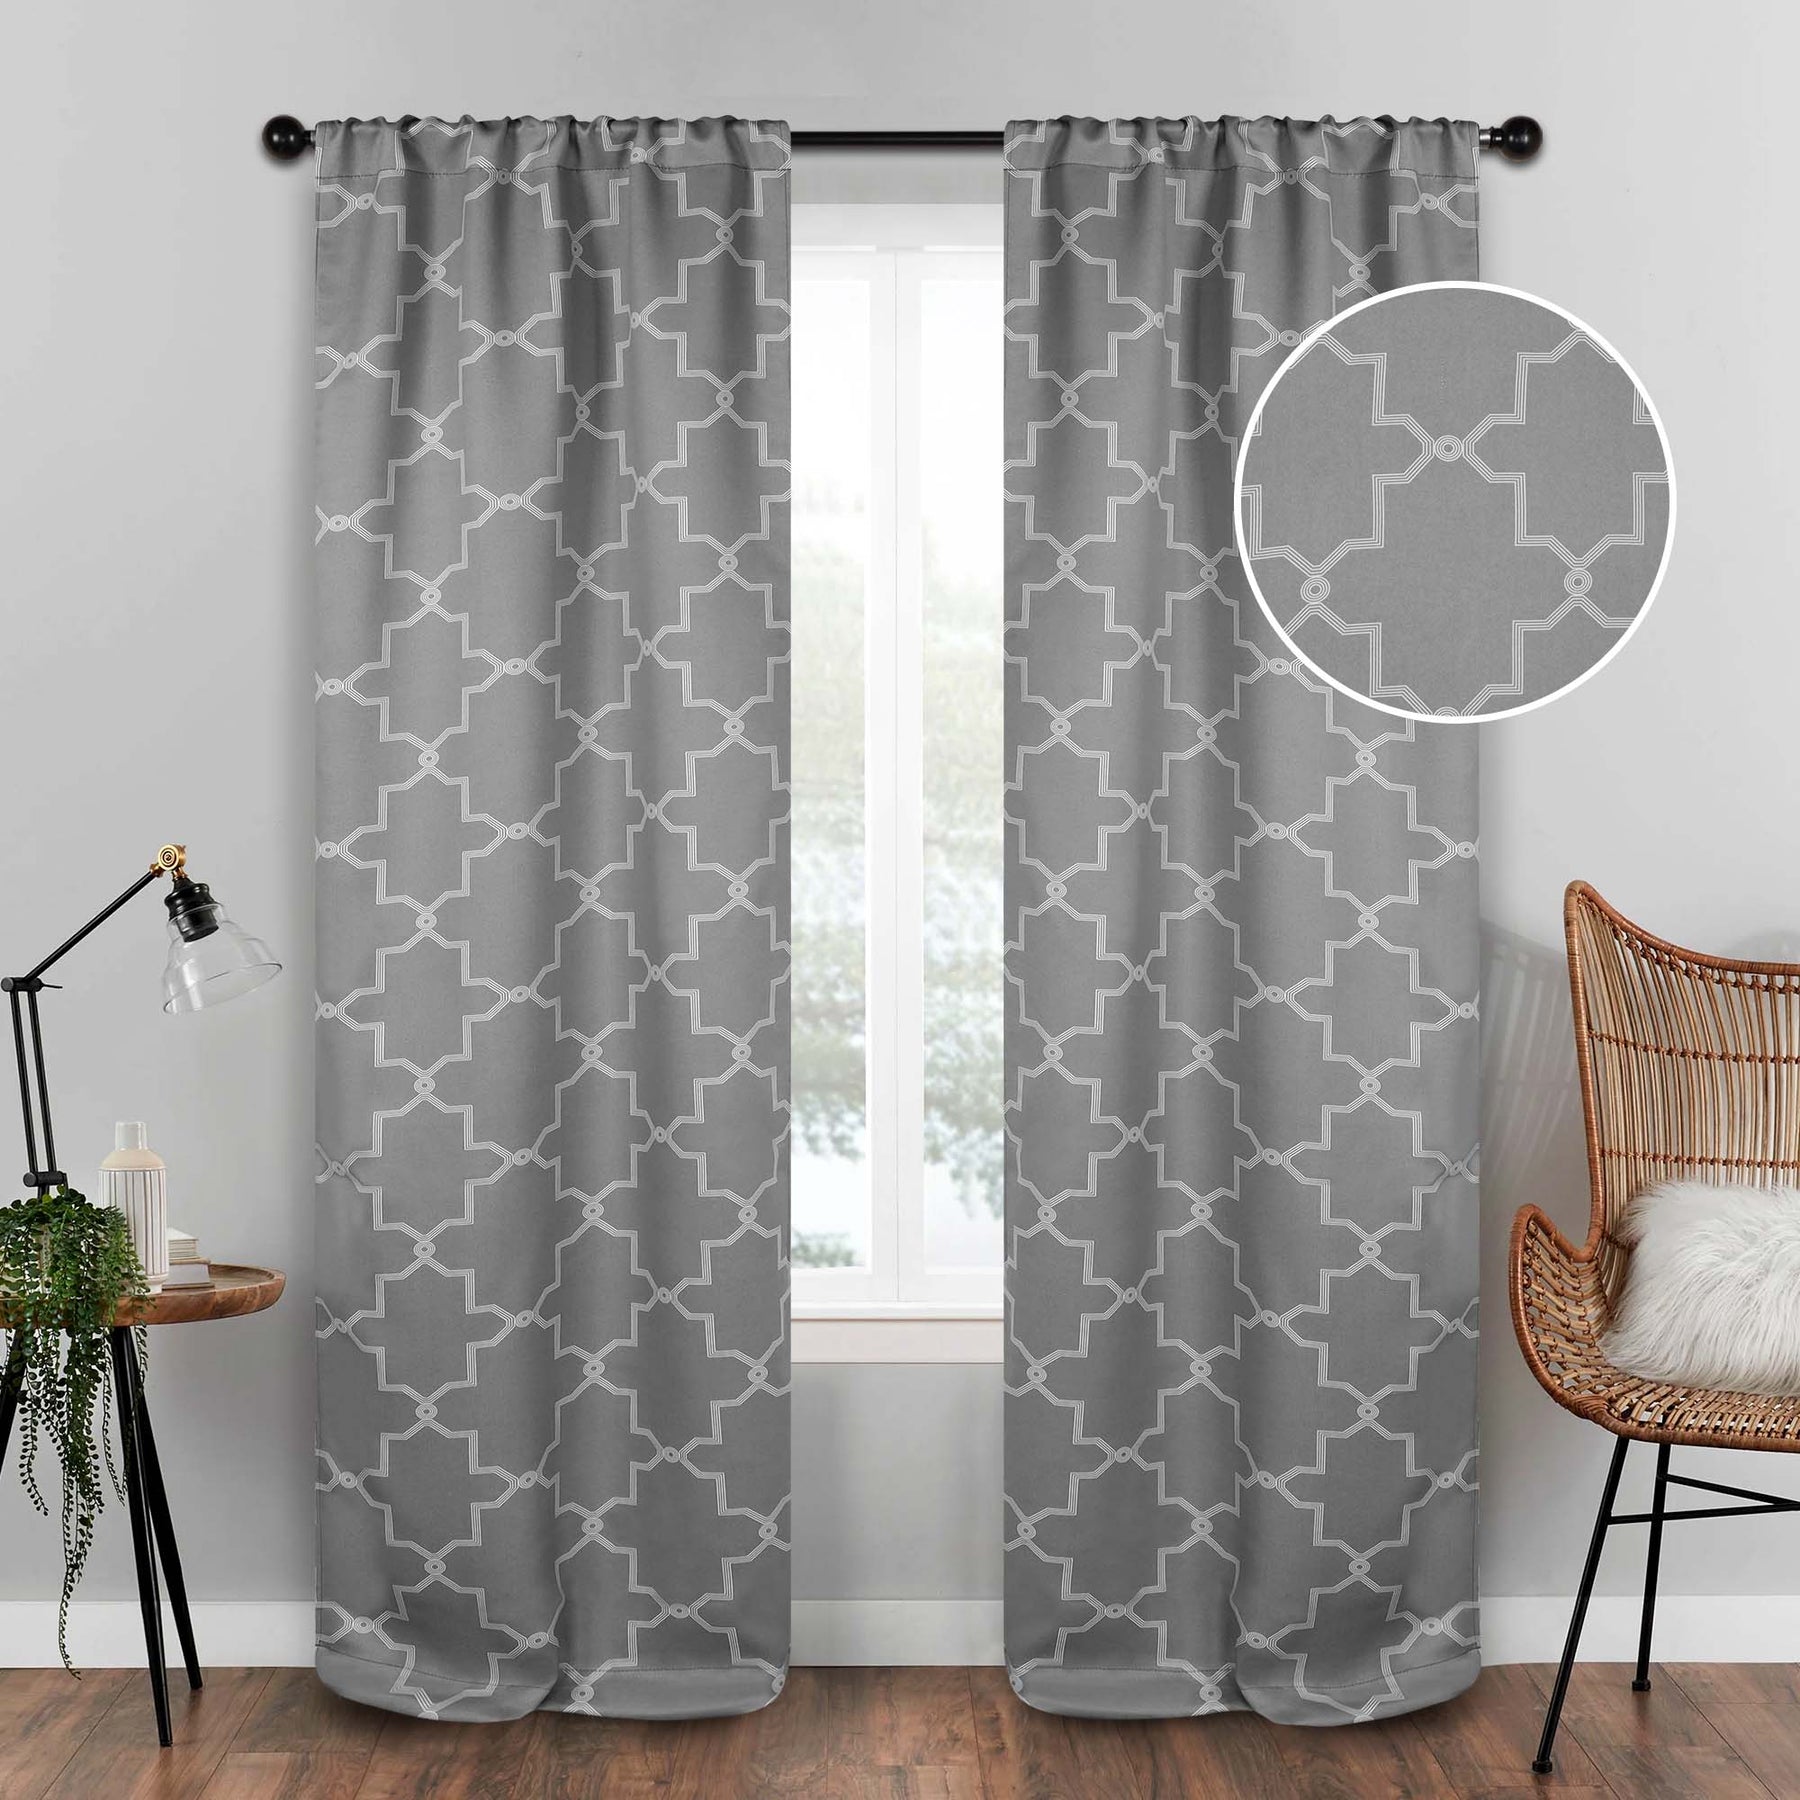 Superior Imperial Trellis Blackout Curtain Set of 2 Panels -  Silver 